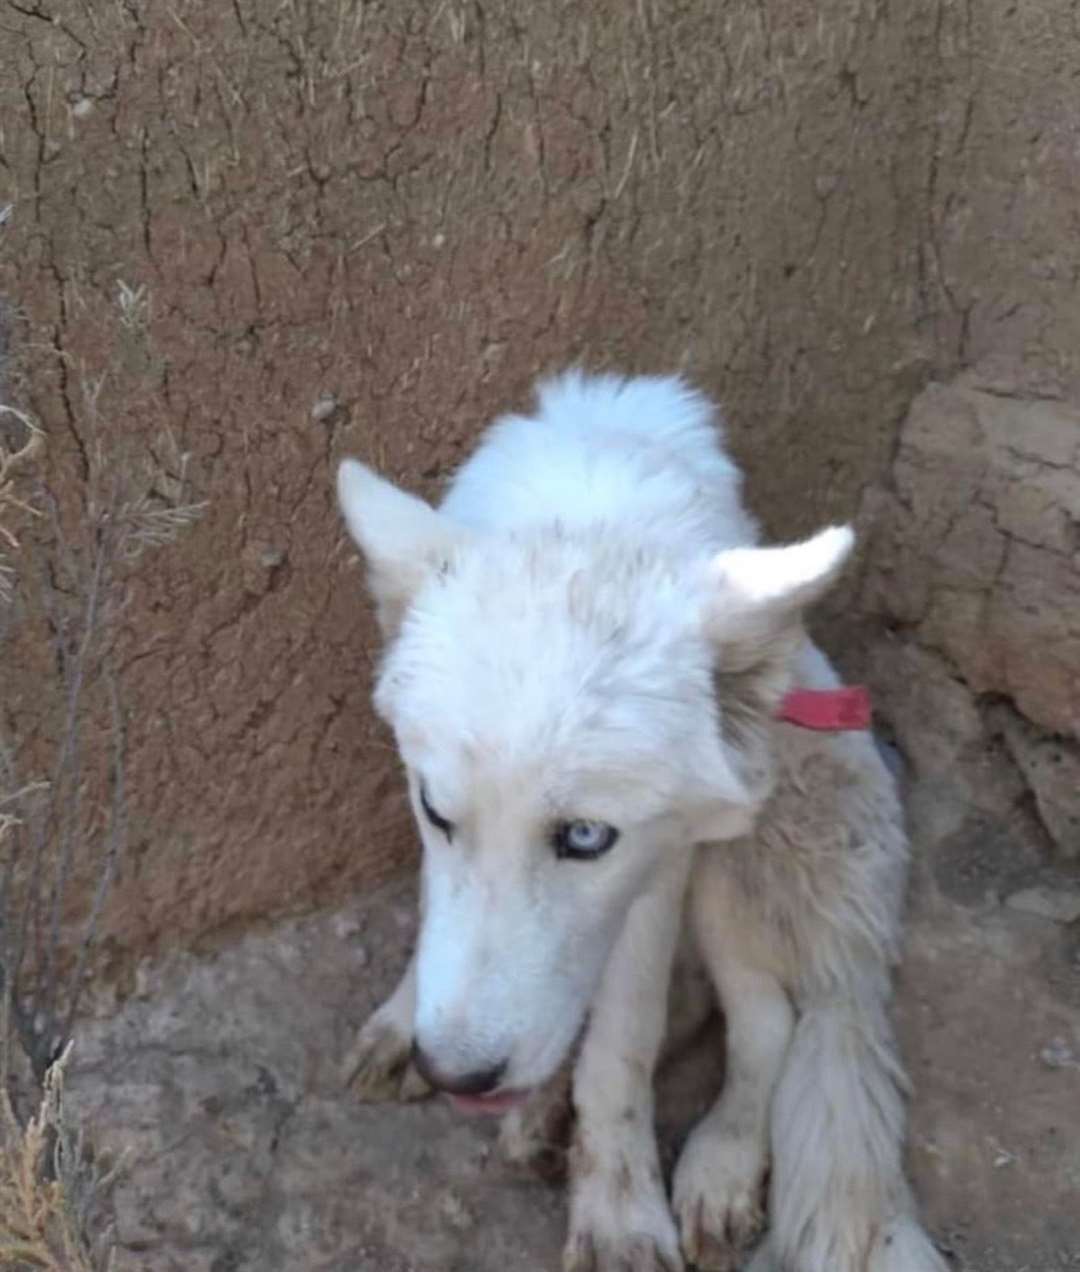 Ghost when he was found in Al Hasakah by Rob.